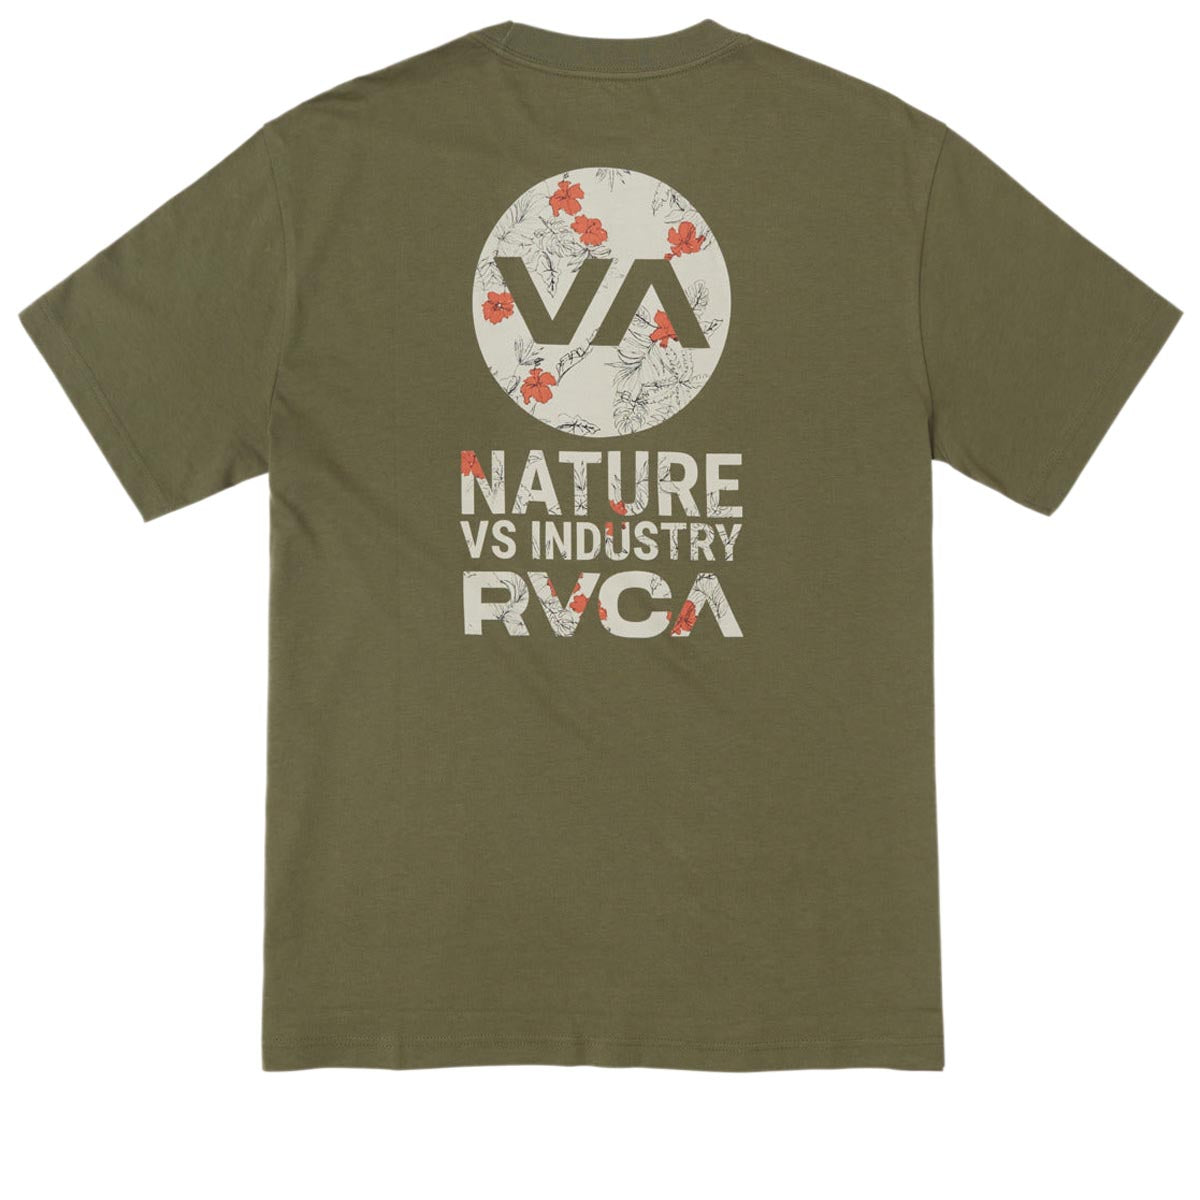 RVCA Drawn In T-Shirt - Olive image 1